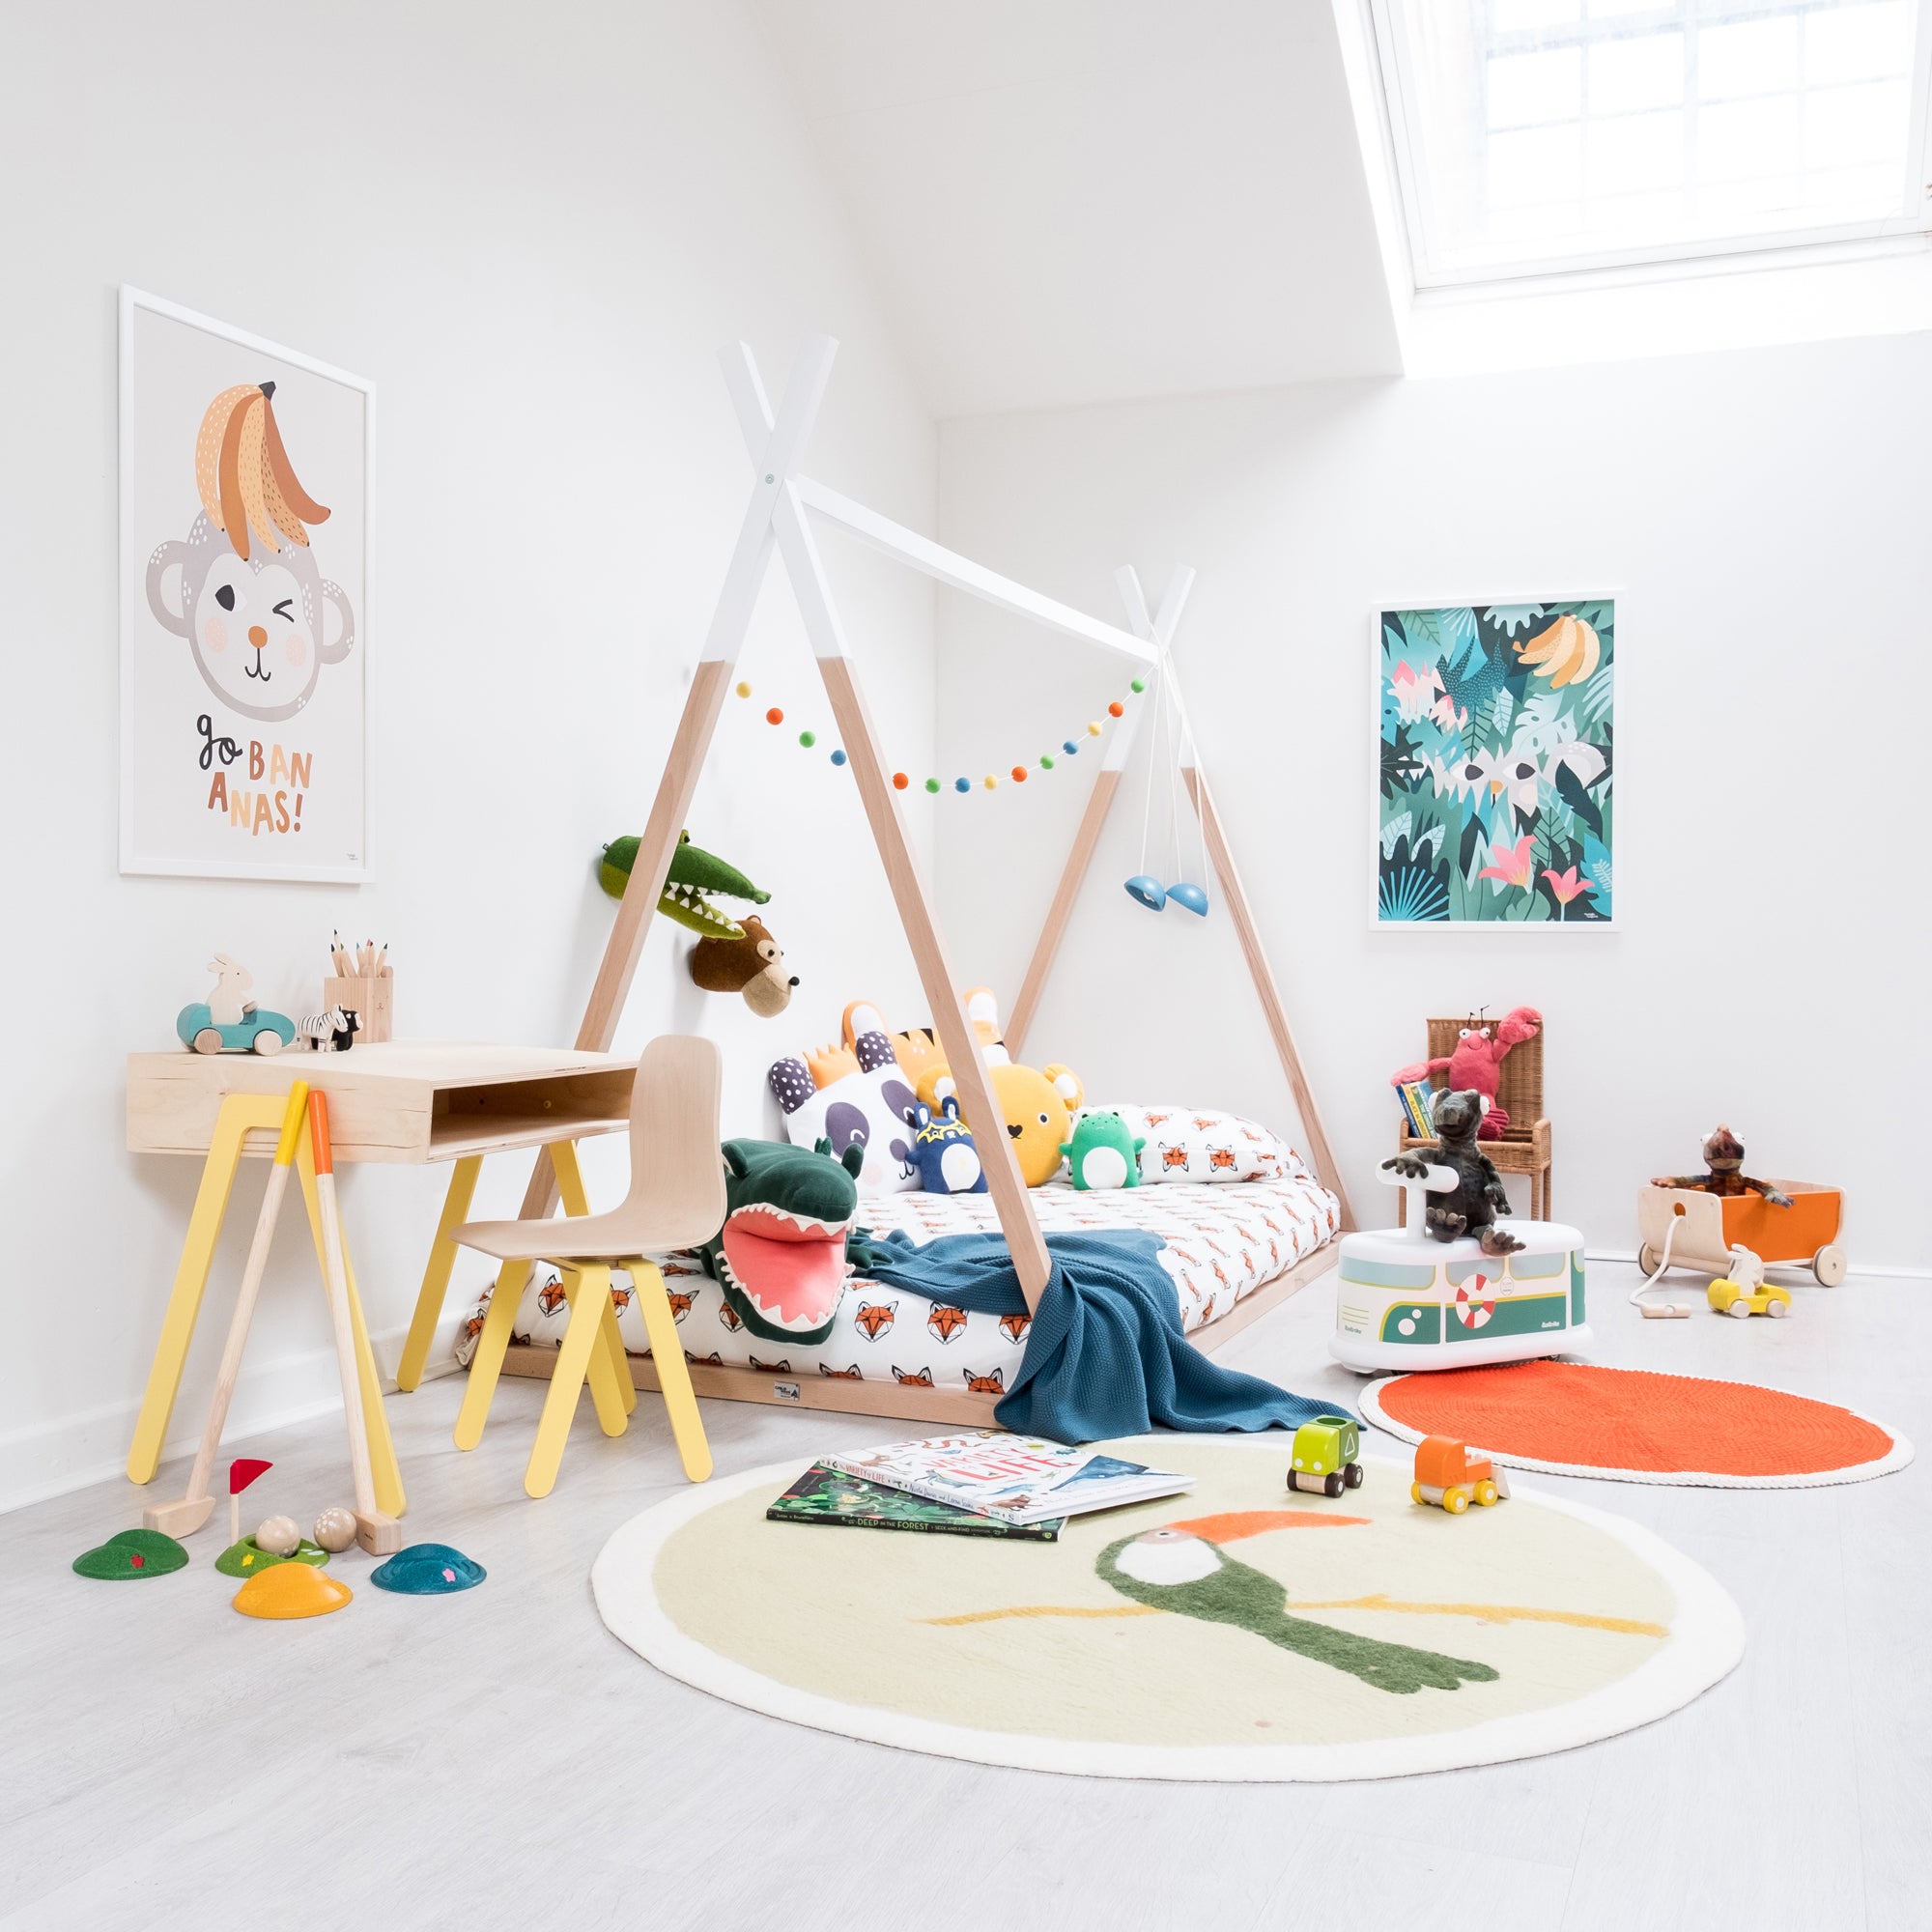 Hide and Seek Children's Room, styled by Bobby Rabbit.